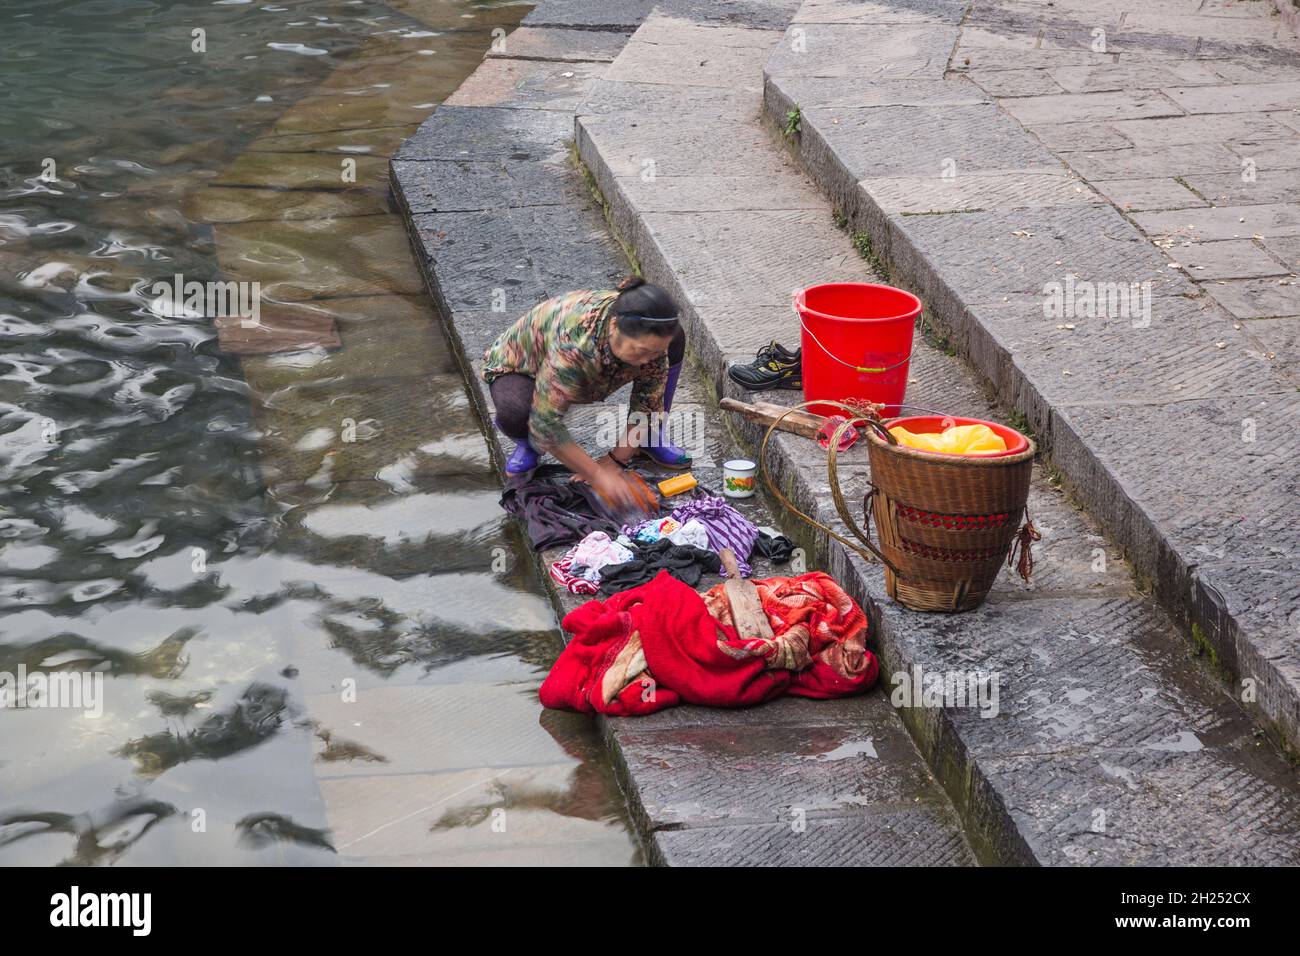 A Chinese woman washes laundry by hand on the steps into the Tuojiang River in Fenghuang, China. Stock Photo